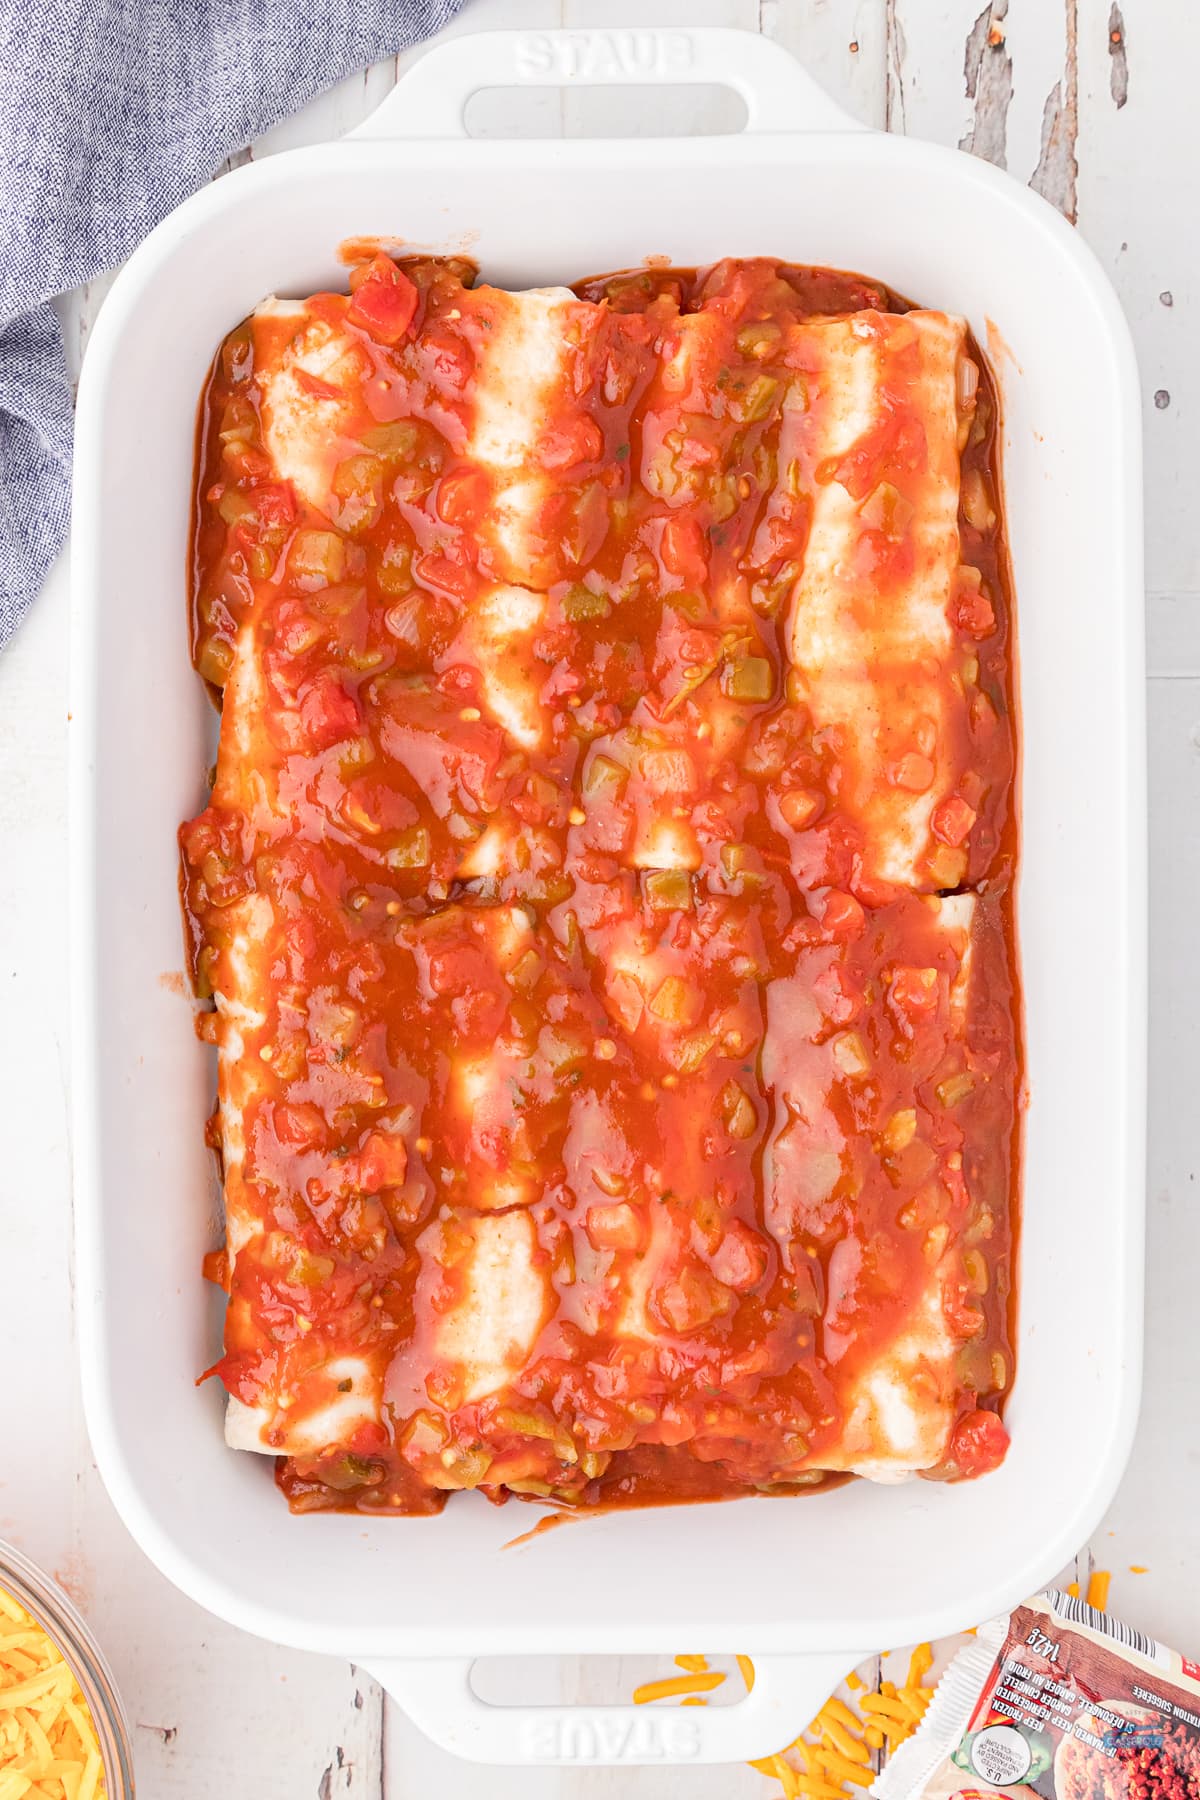 burritos covered in red sauce in a white casserole dish